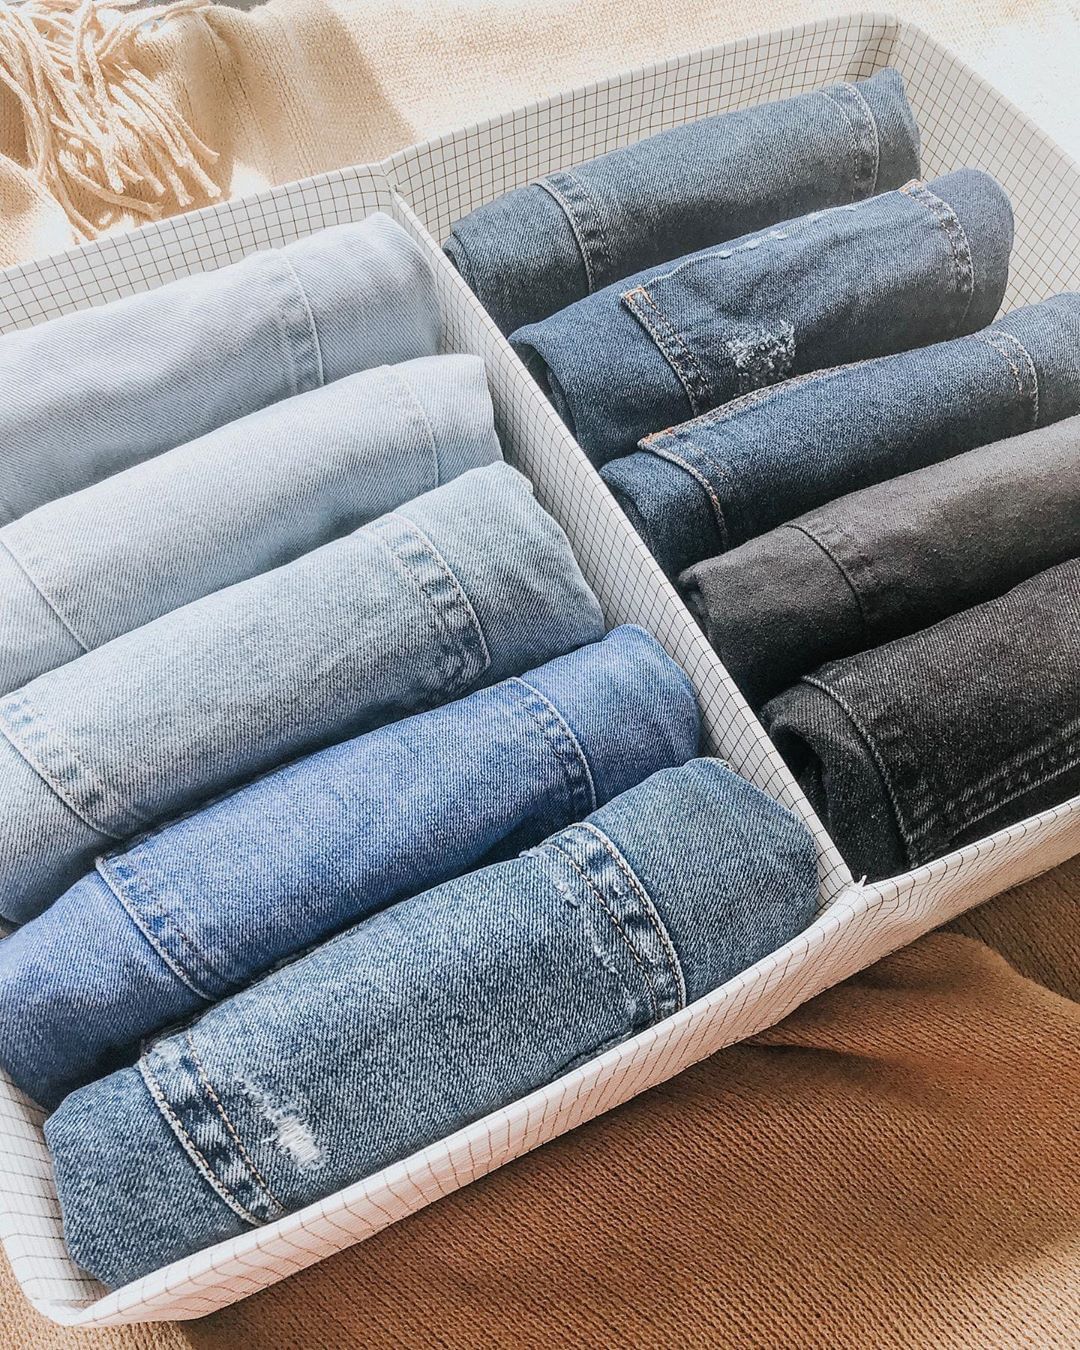 Jeans Rolled Up into a Storage Basket. Photo by Instagram user @zenwithjulia